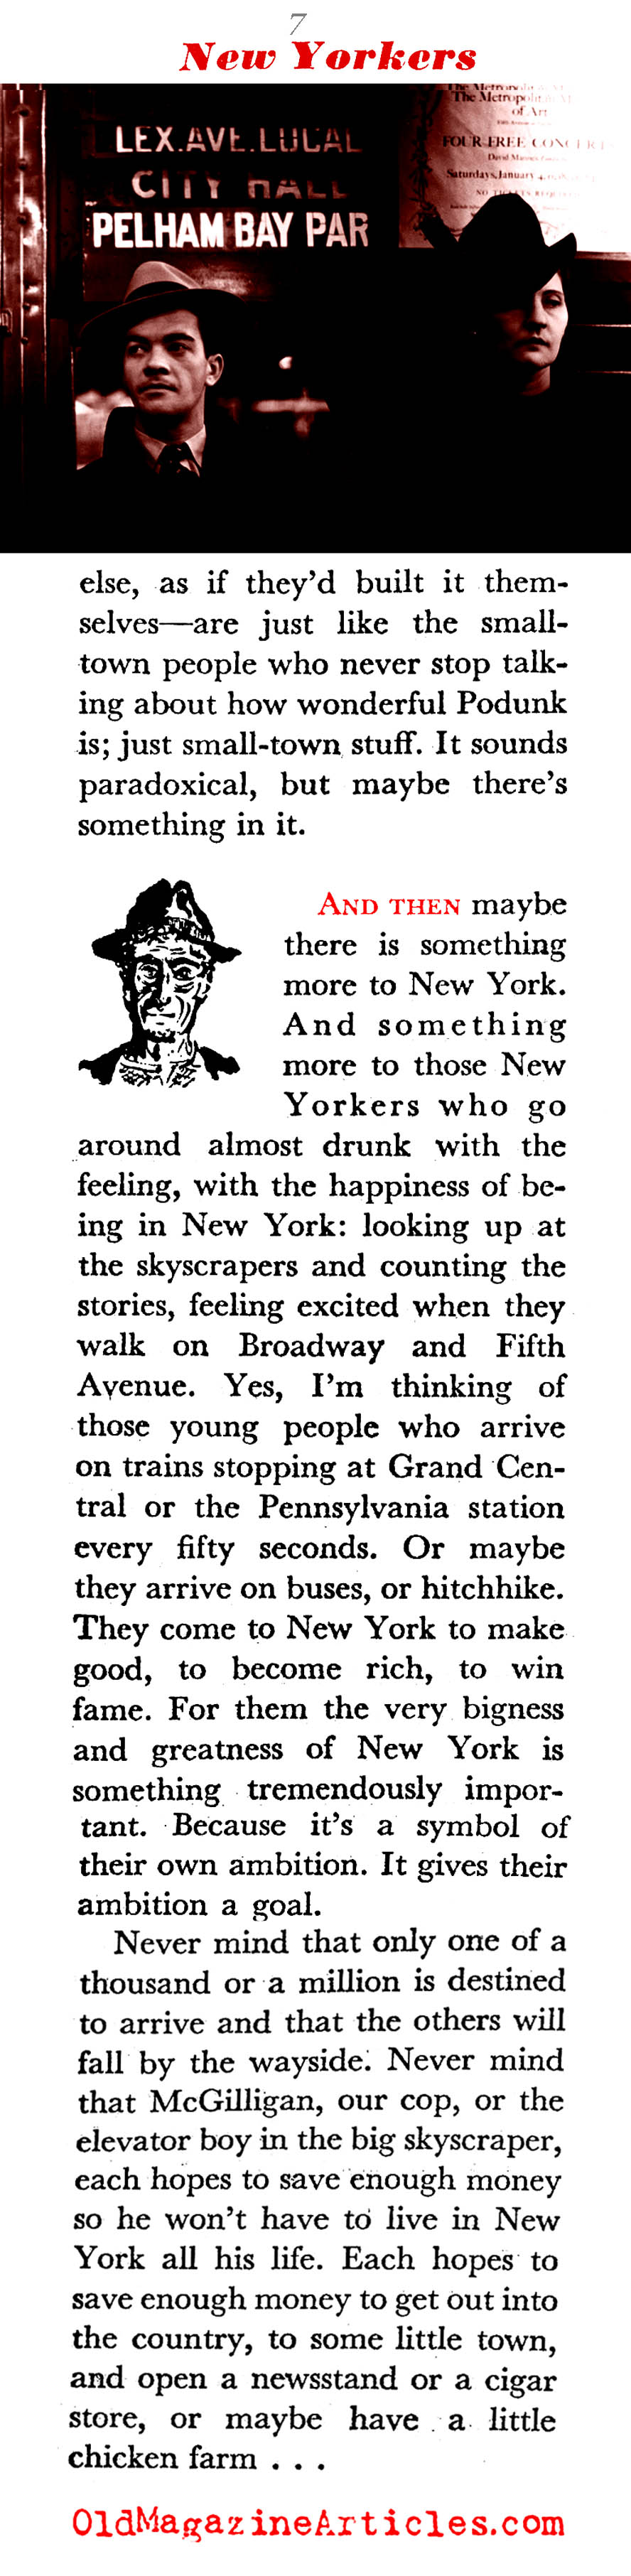 In Search of the Average New Yorker (Coronet Magazine, 1941)